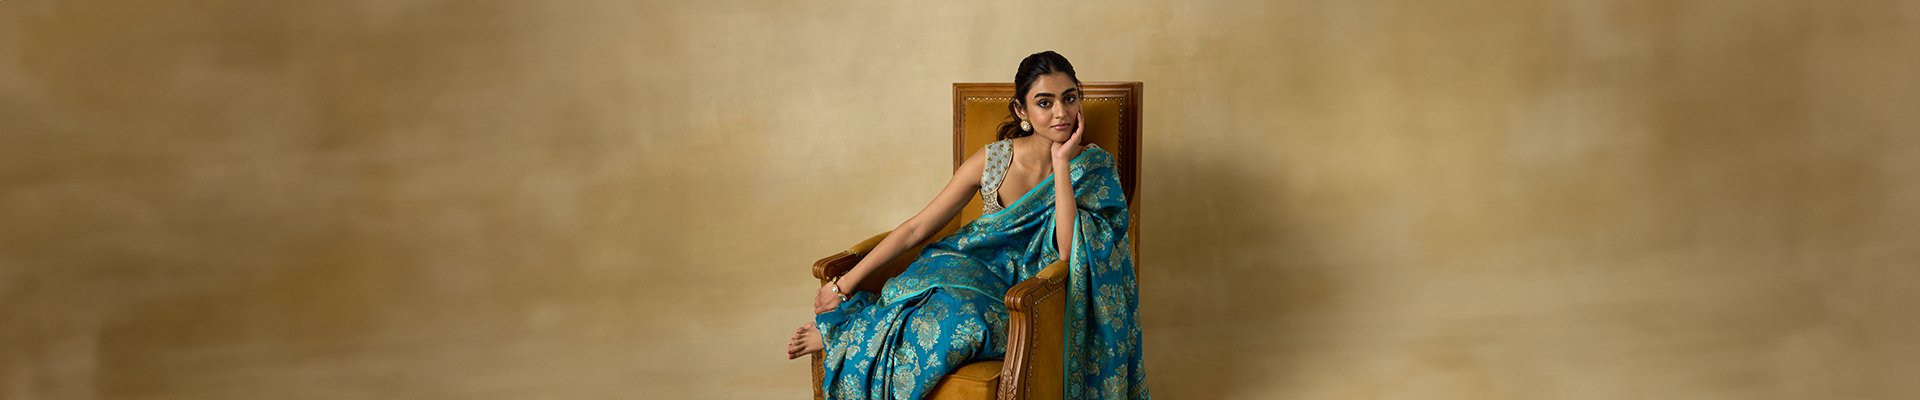 Pure_Handwoven_Sarees:_Capturing_the_Essence_of_India's_Craft_Traditions_WeaverStory